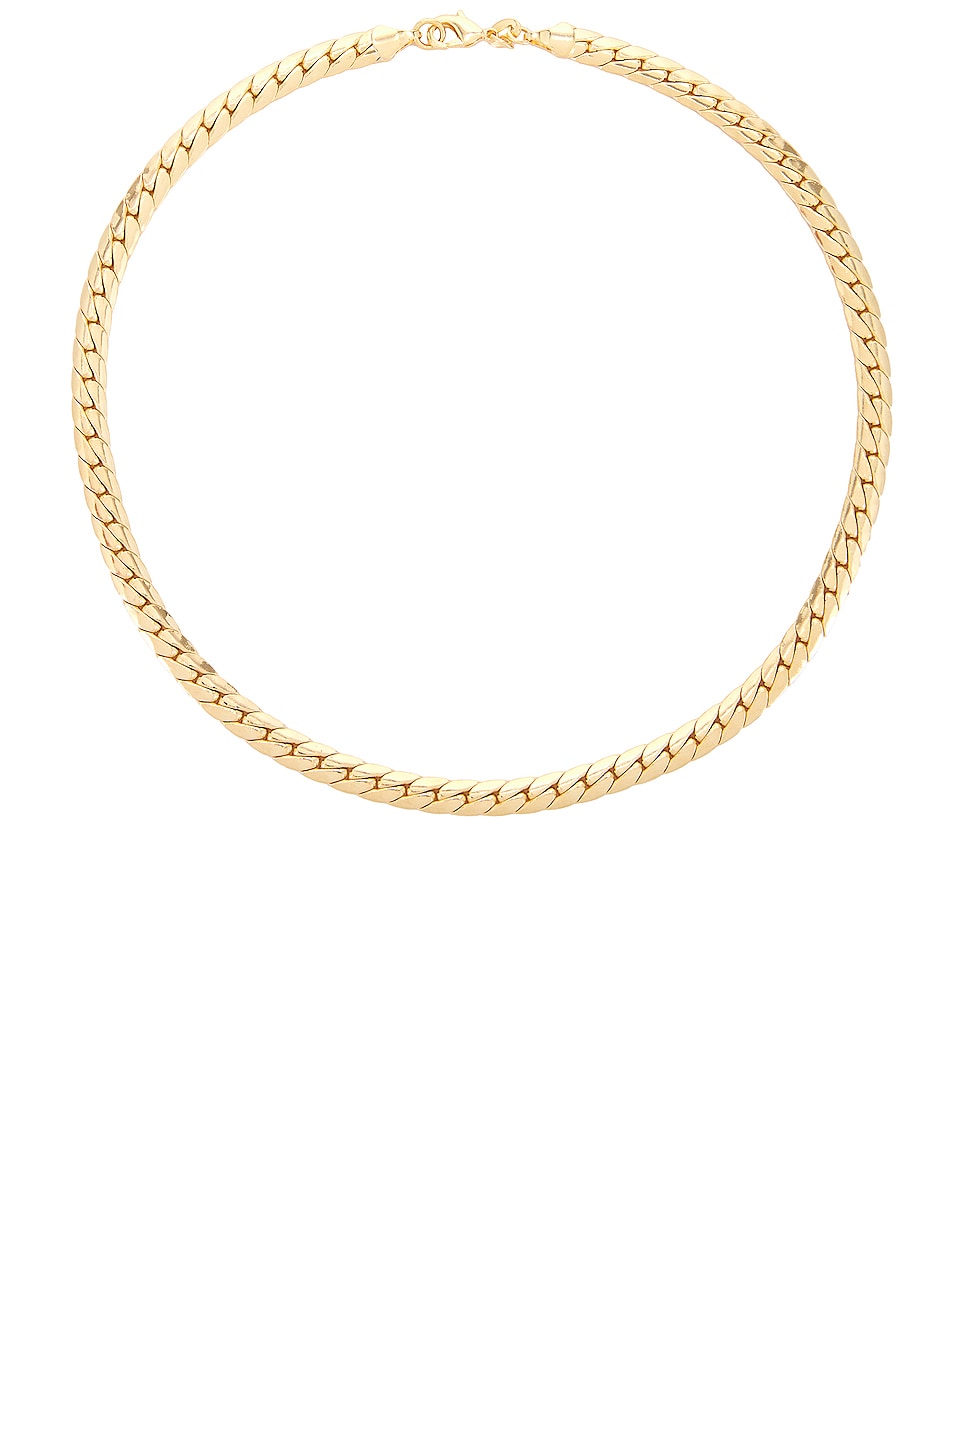 Image 1 of Jordan Road Jewelry Flat Chain Necklace in 18k Gold Plated Brass